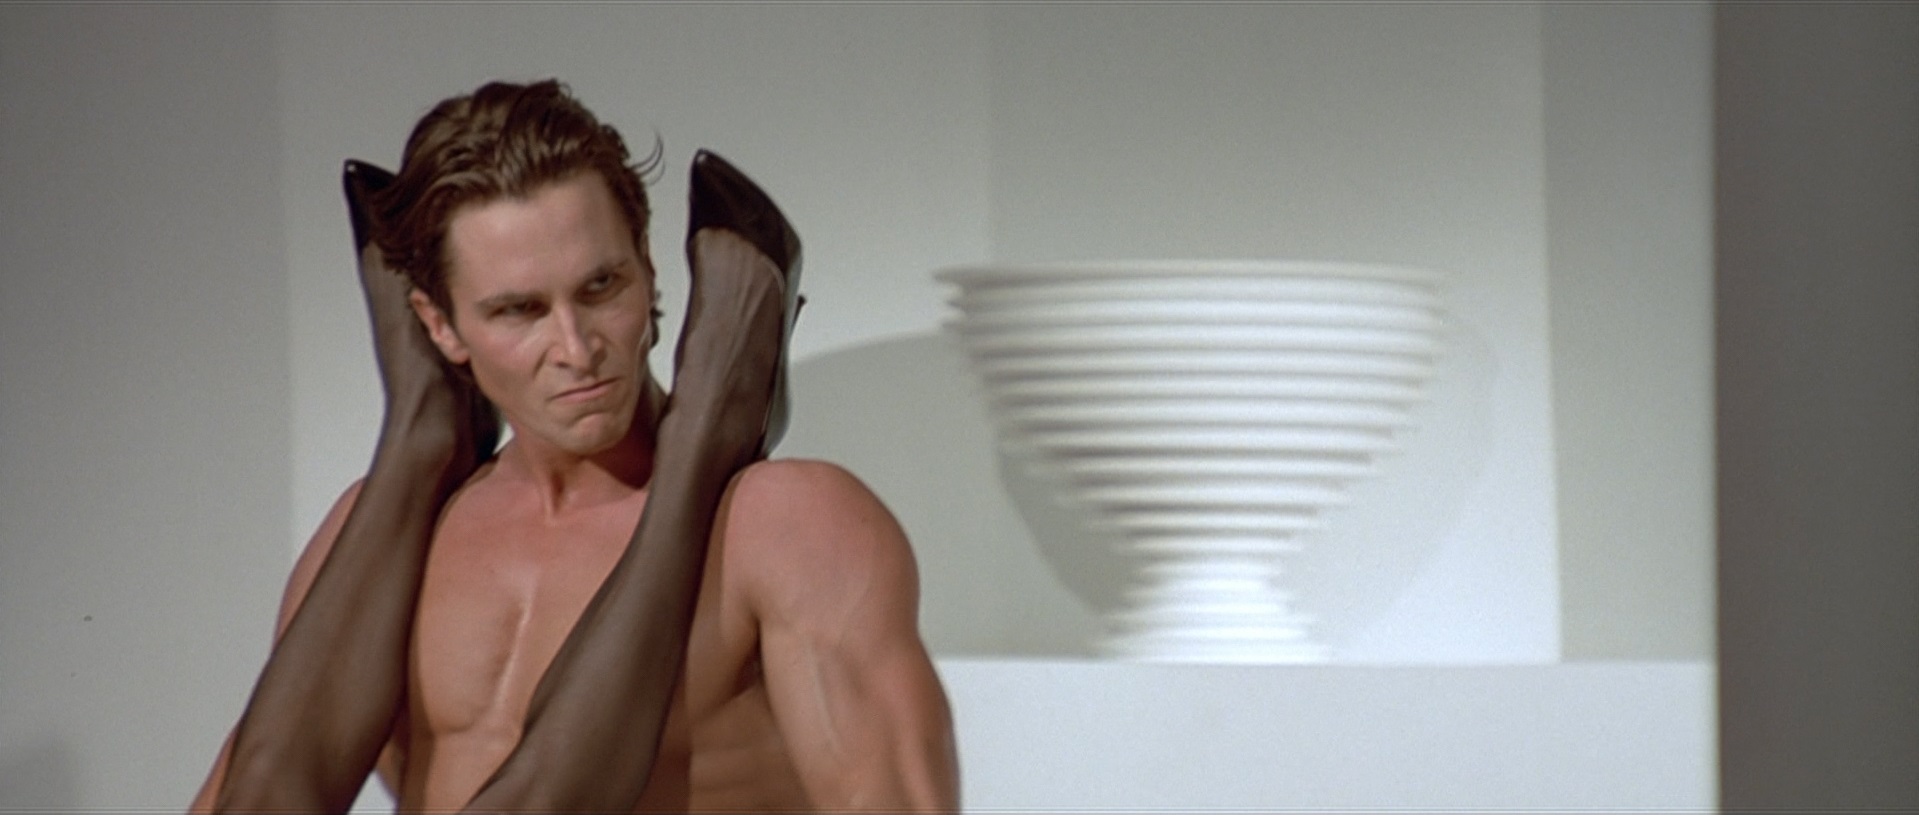 American Psycho and Chill. 